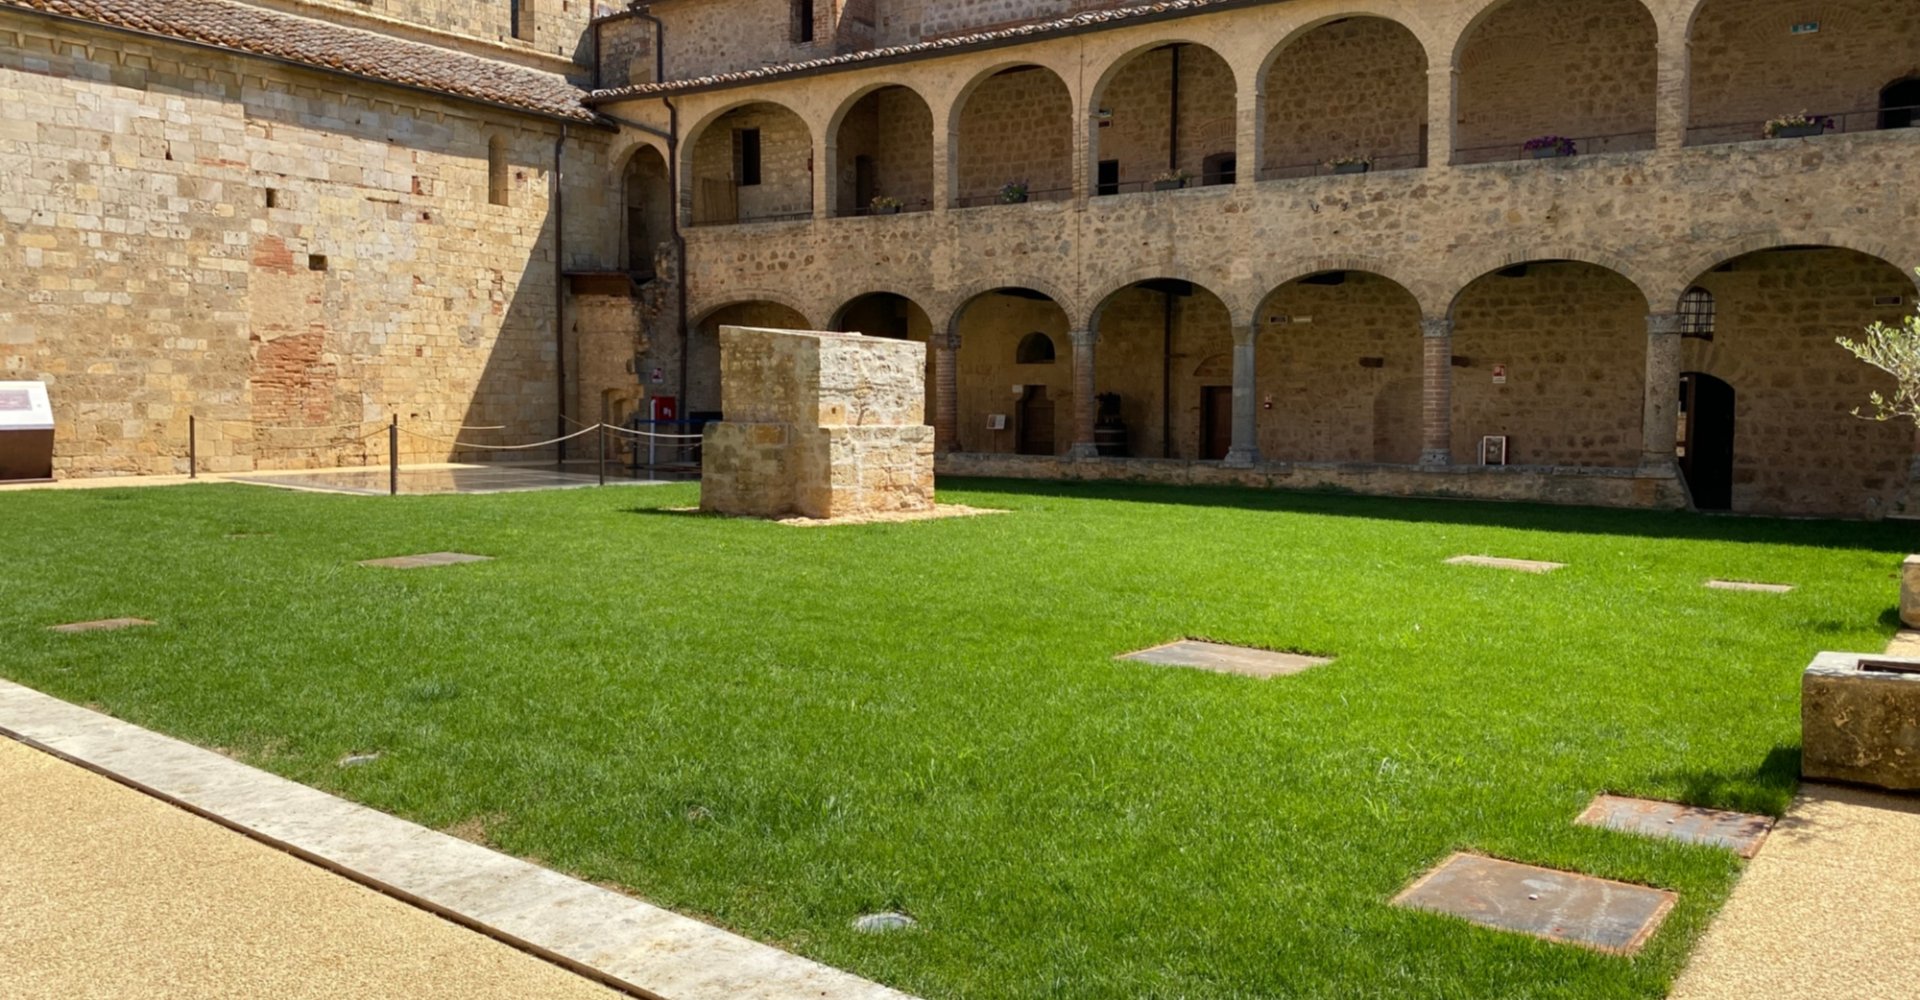 Archeological Museum of Monteriggioni, cloister